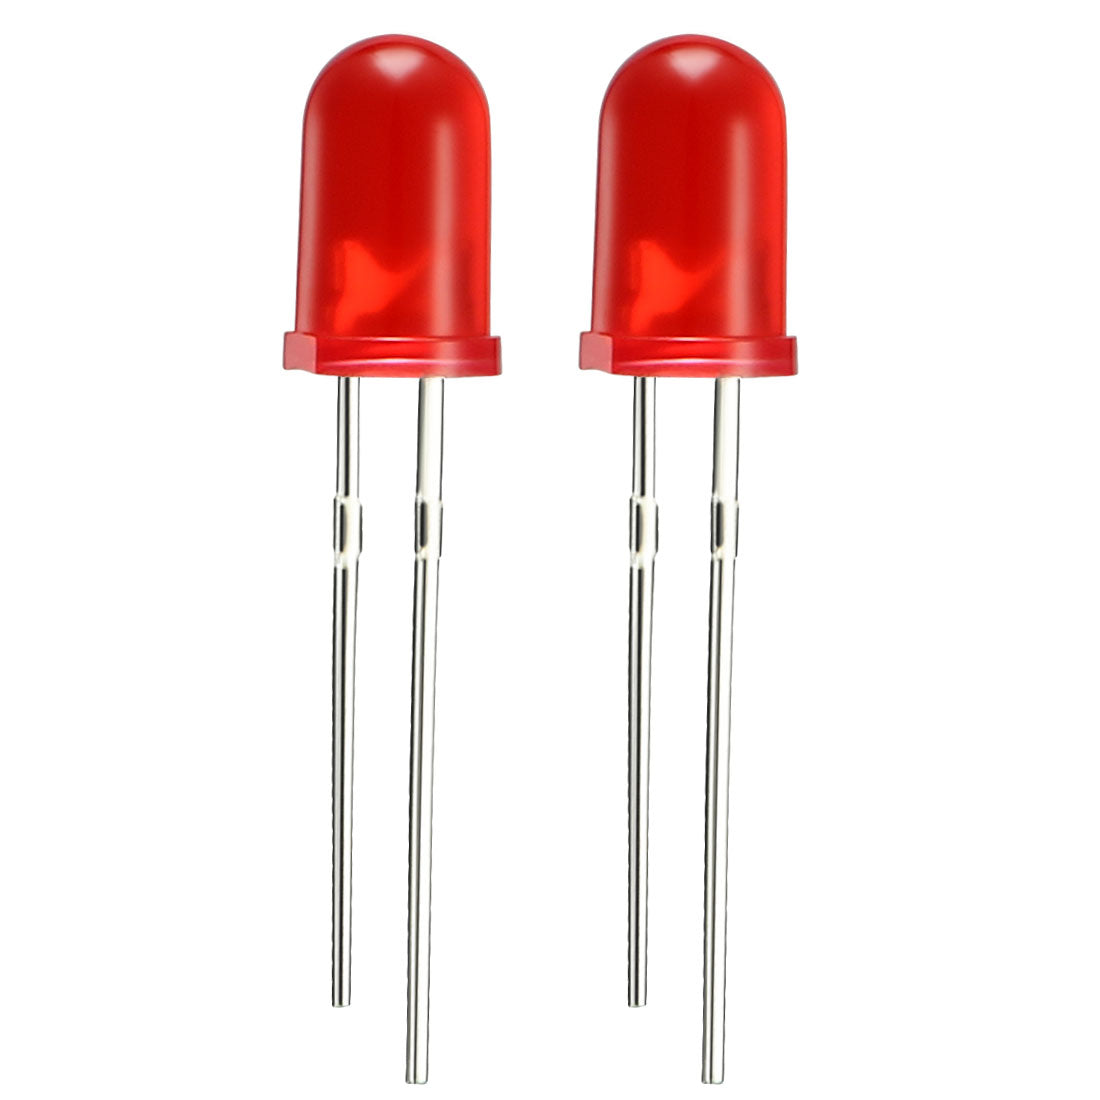 uxcell Uxcell 55pcs 5mm Red LED Diode Lights Colored Lens Diffused Round 1.9-2.1V 20mA 0.02W Lighting Bulb Lamp Electronic Components Light Emitting Diodes